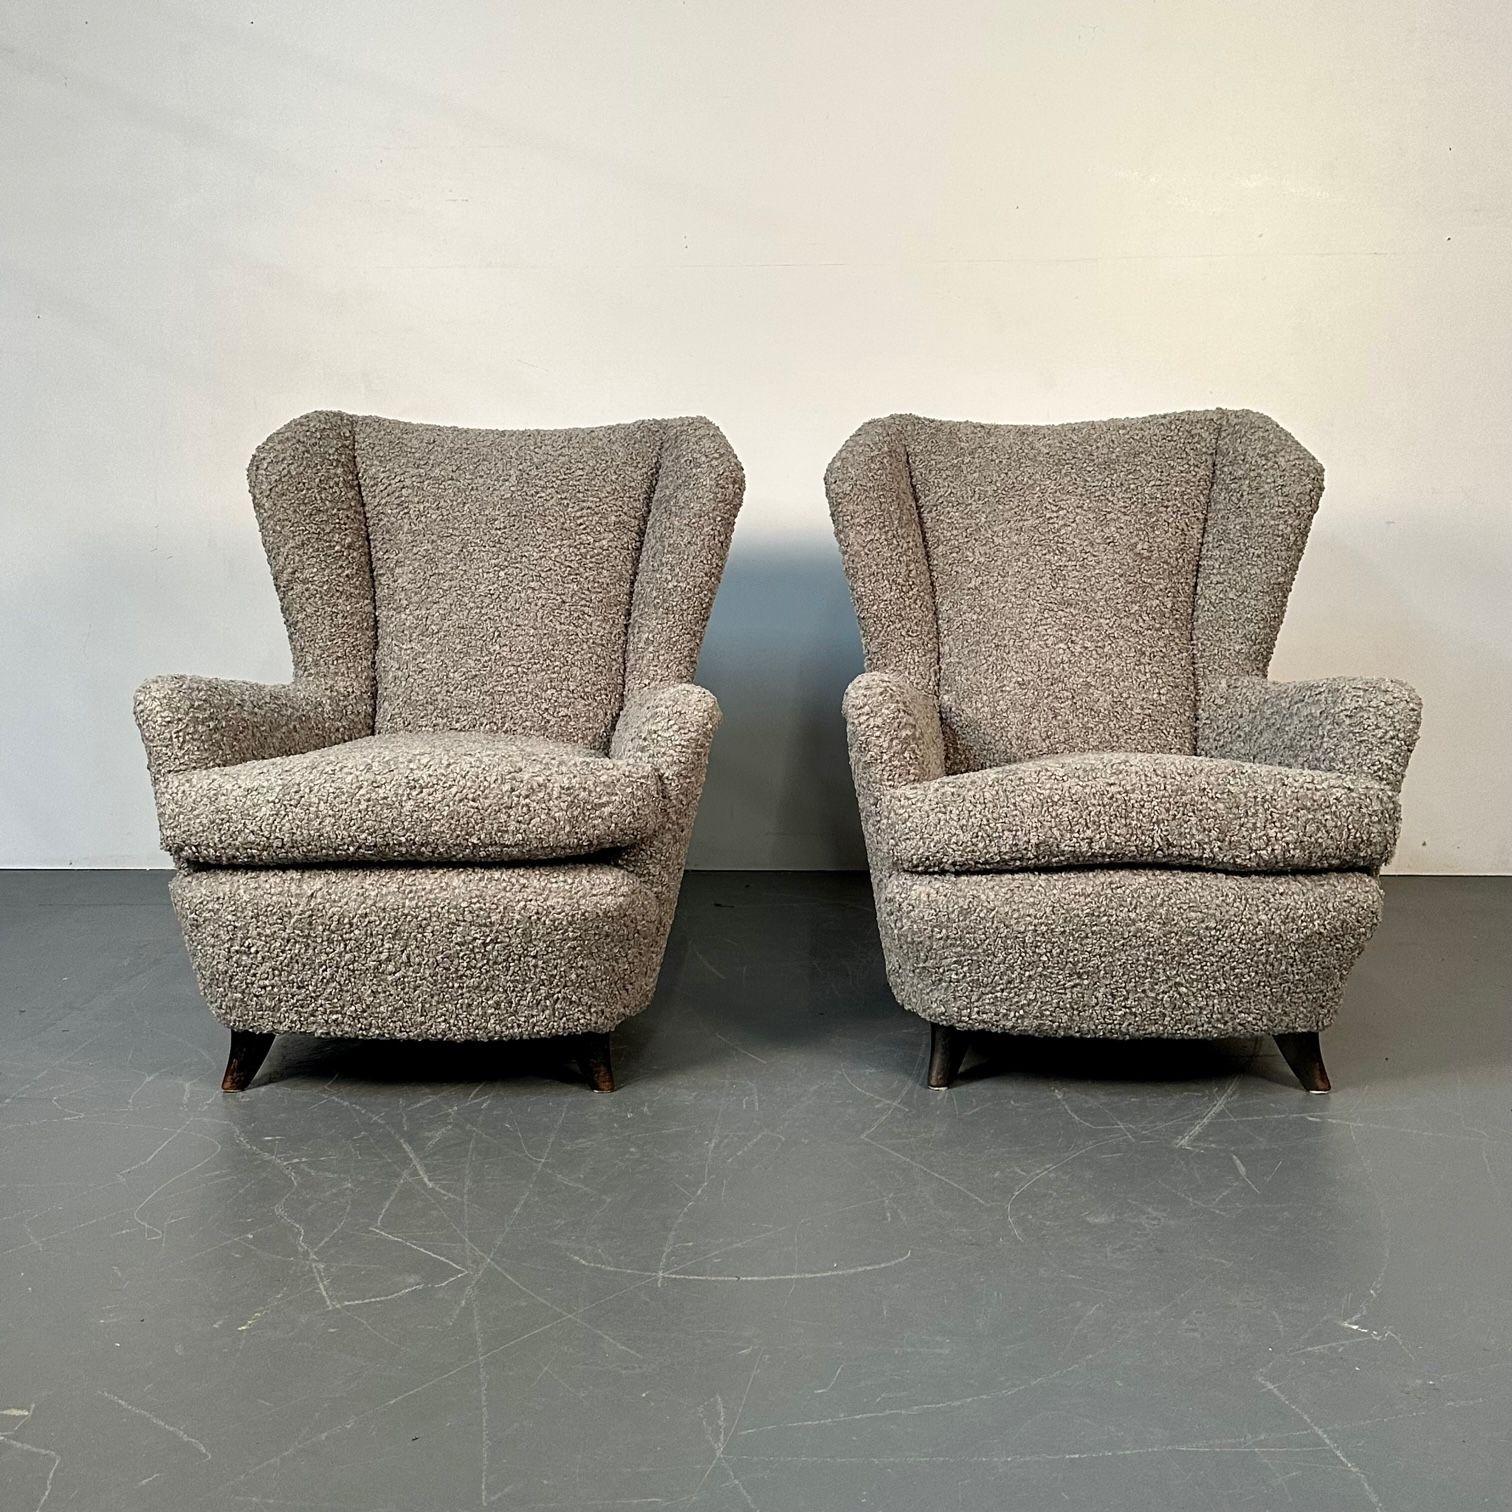 Pair Italian Mid-Century Modern Wingback Lounge Chairs, Zanuso Style Grey Boucle For Sale 1